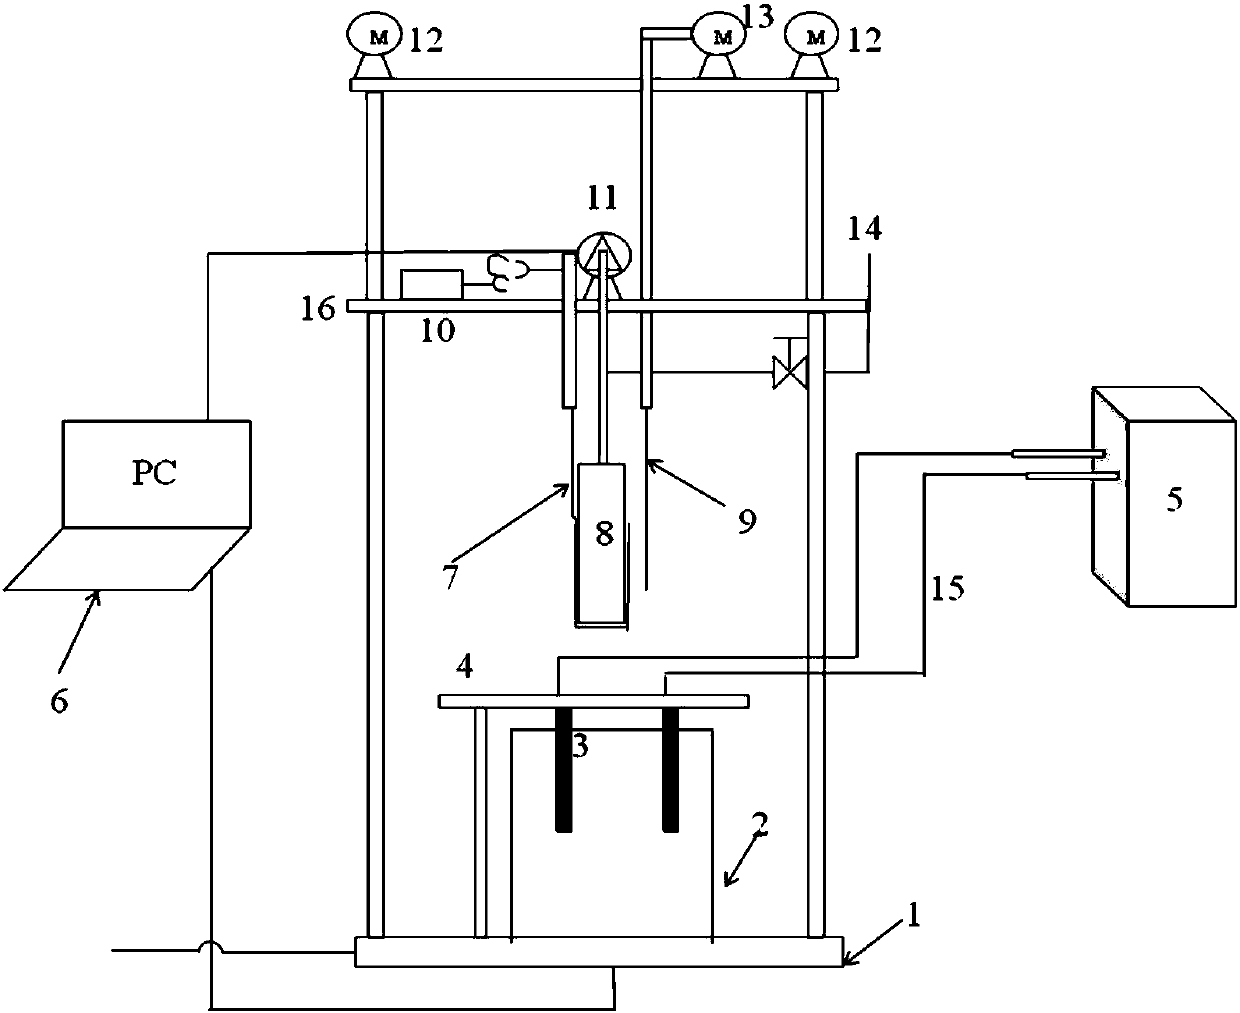 Simulation device for solidification of molten steel in continuous casting crystallizer under function of electric pulses